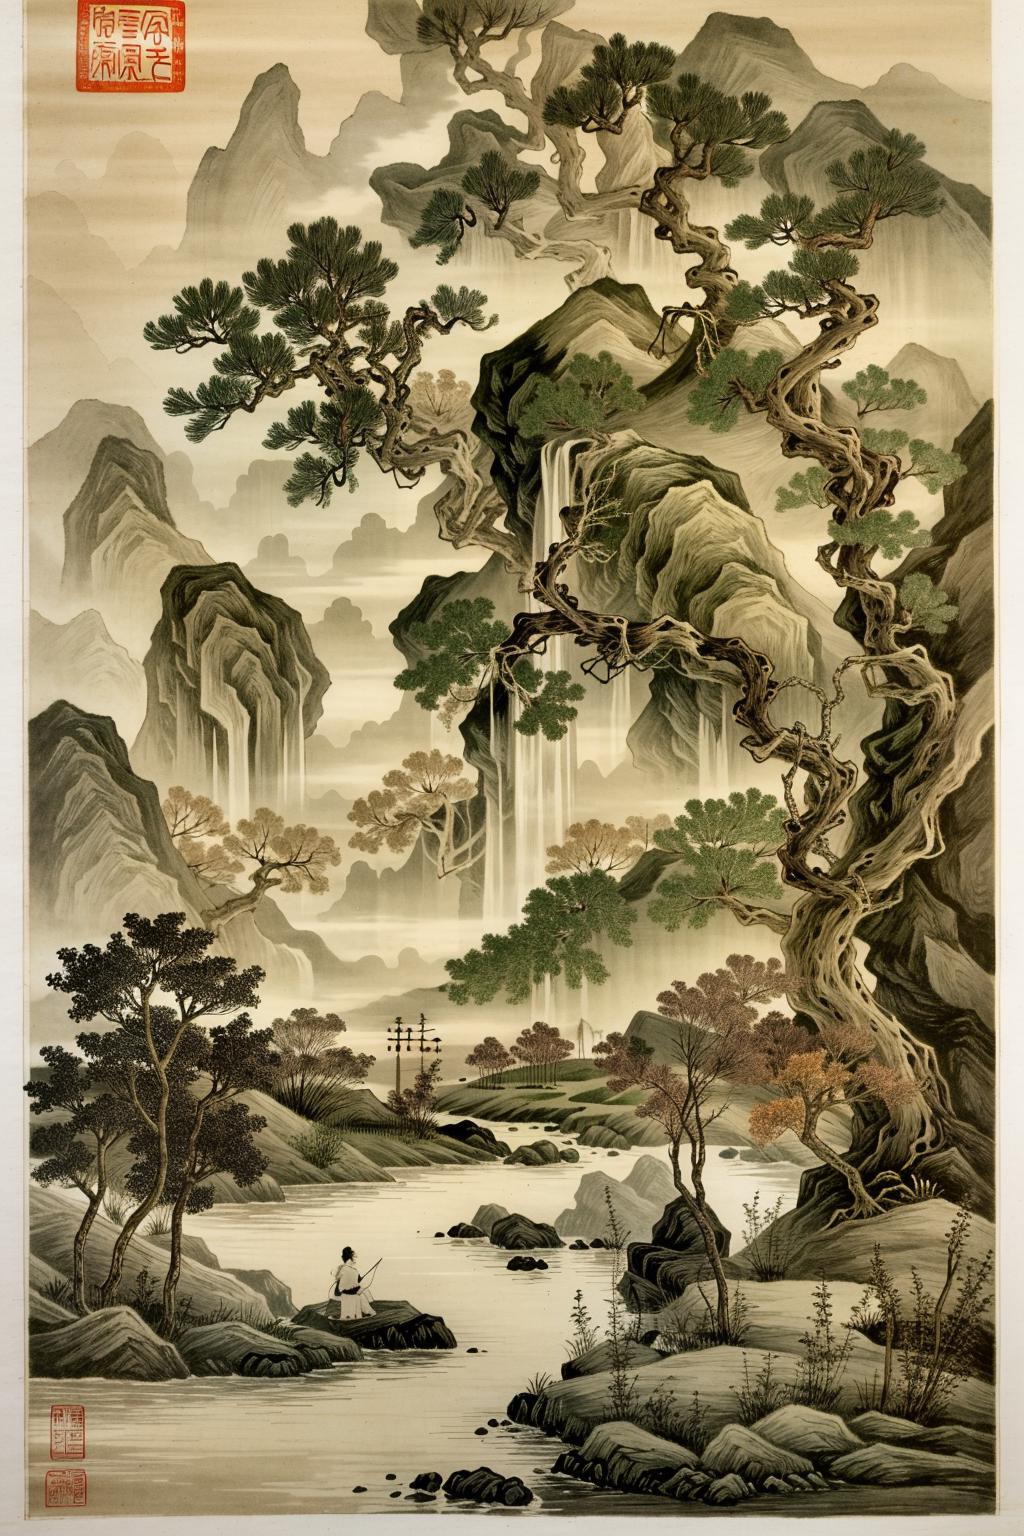 A Painting of a Waterfall and Trees in a Mountainous Landscape